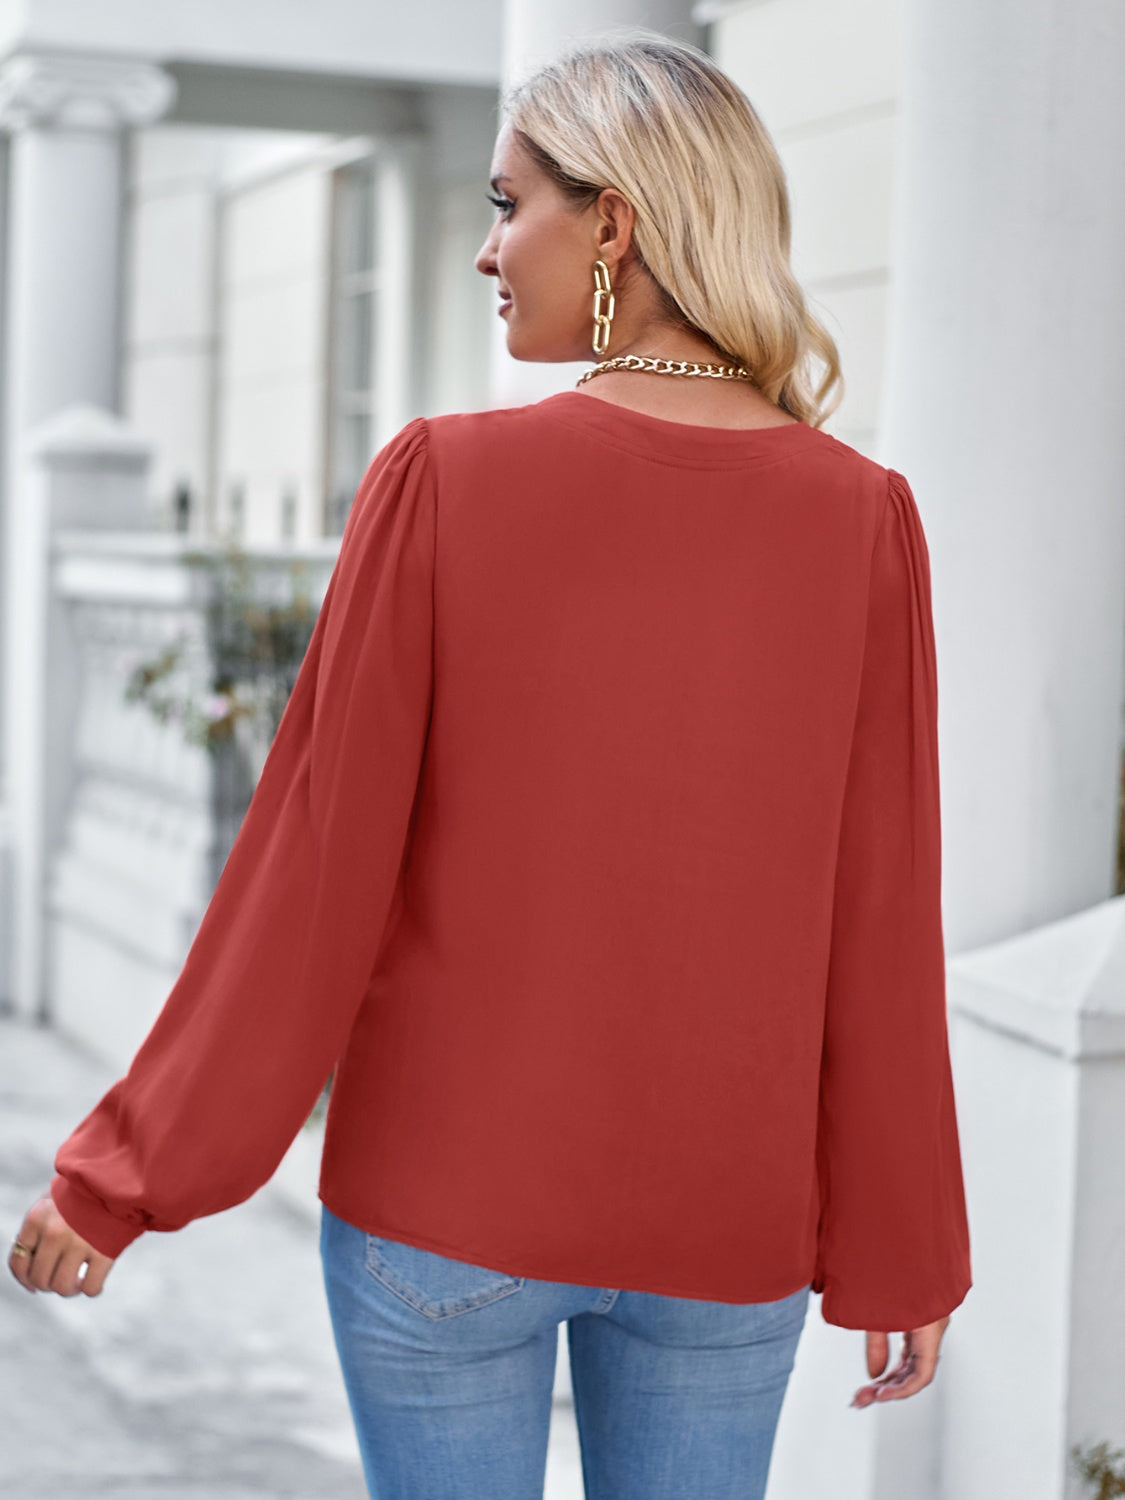 Rustling Orchard Neck Puff Sleeve 100% Viscose Blouse | Hypoallergenic - Allergy Friendly - Naturally Free